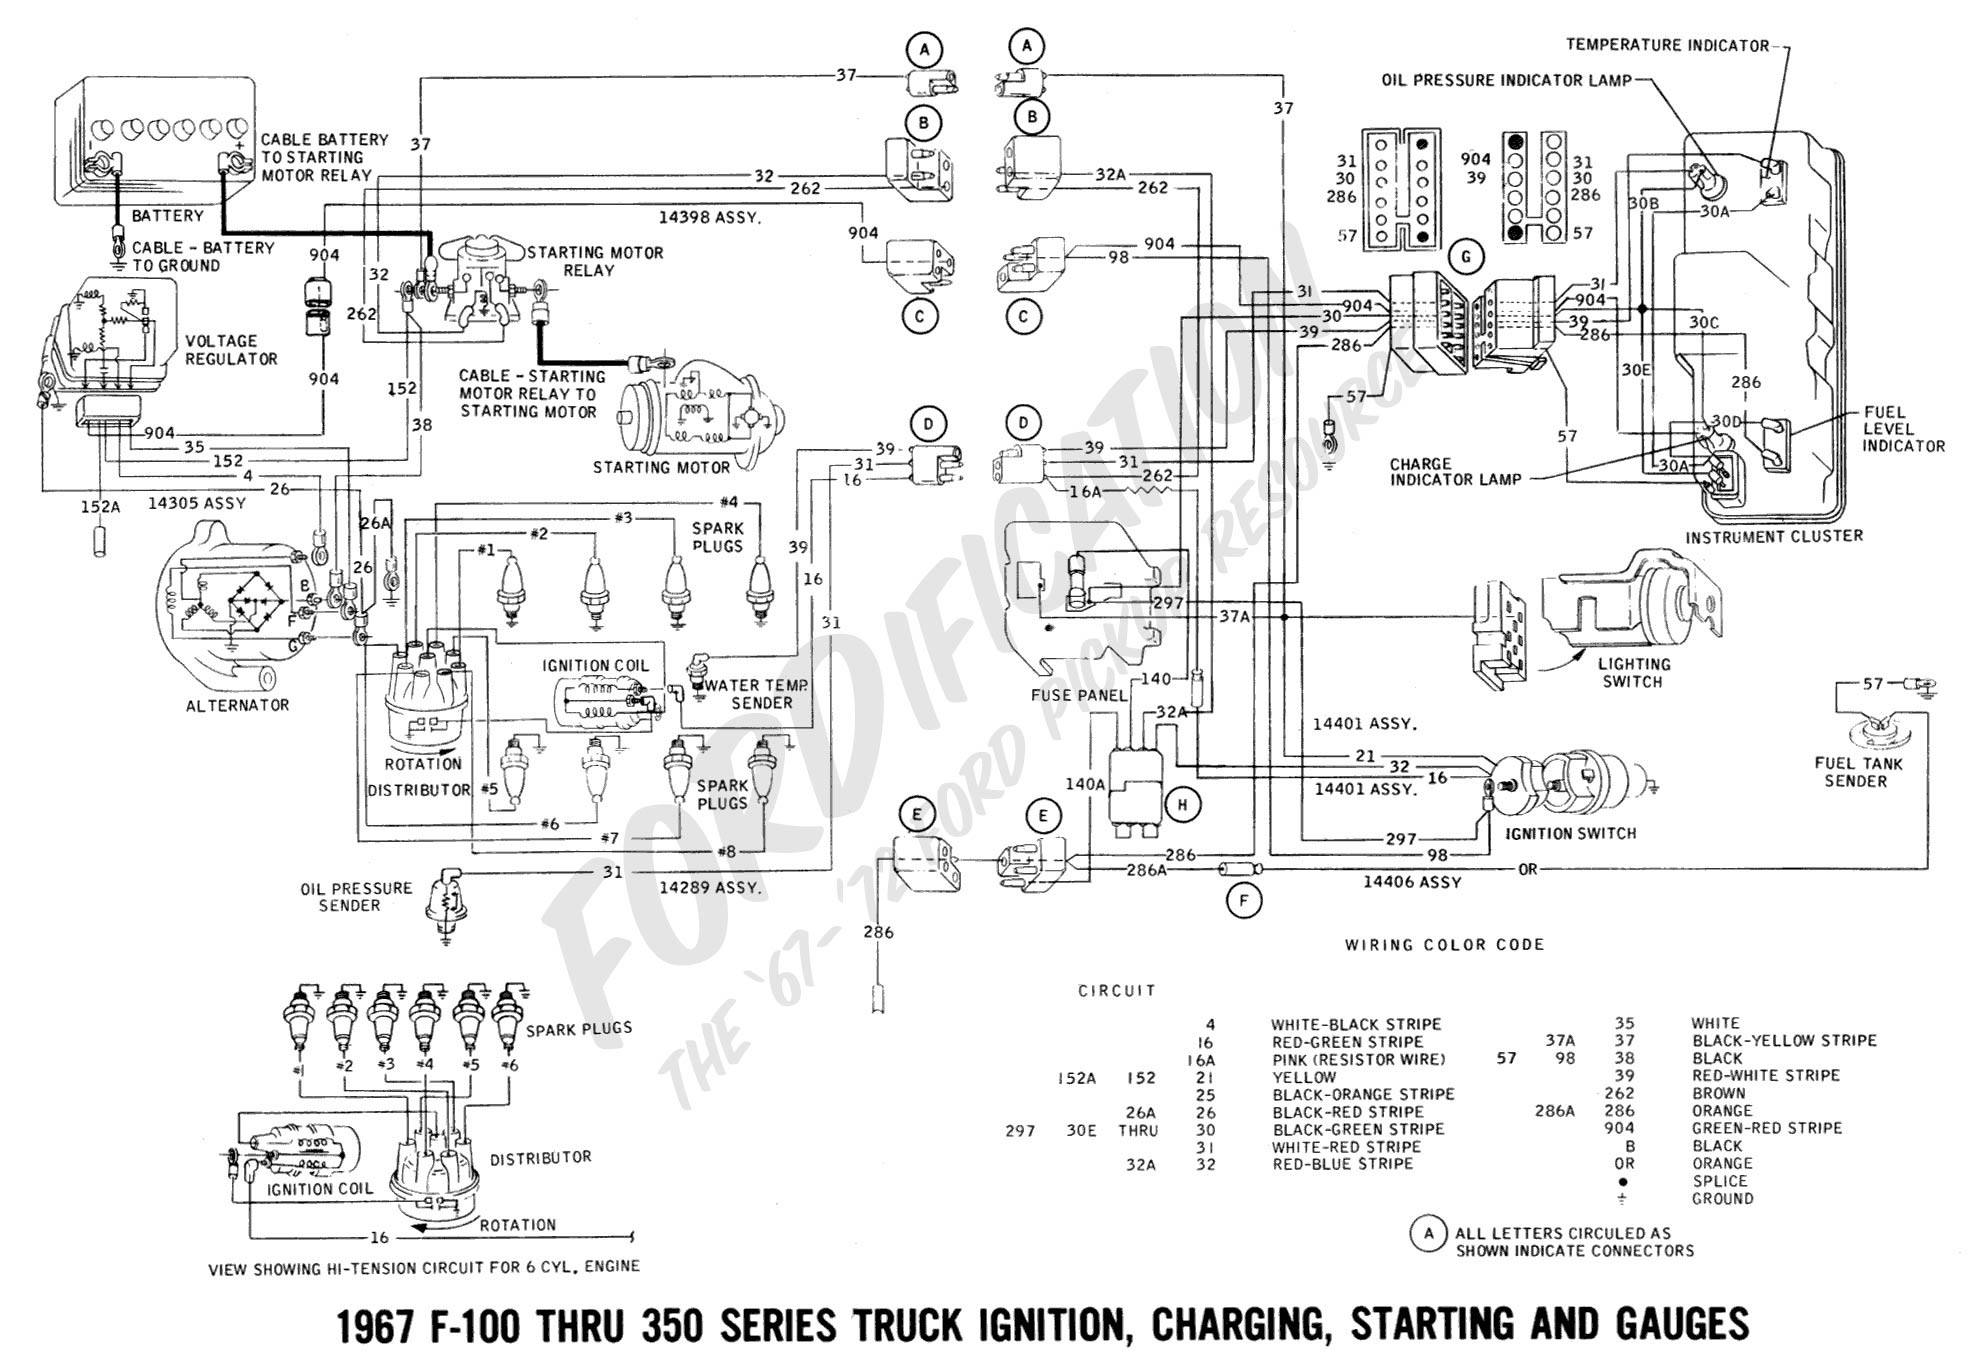 2001 ford Explorer Engine Diagram Well ford F 350 Wiring Diagram 1968 ford Mustang Fuse Box Diagram Of 2001 ford Explorer Engine Diagram